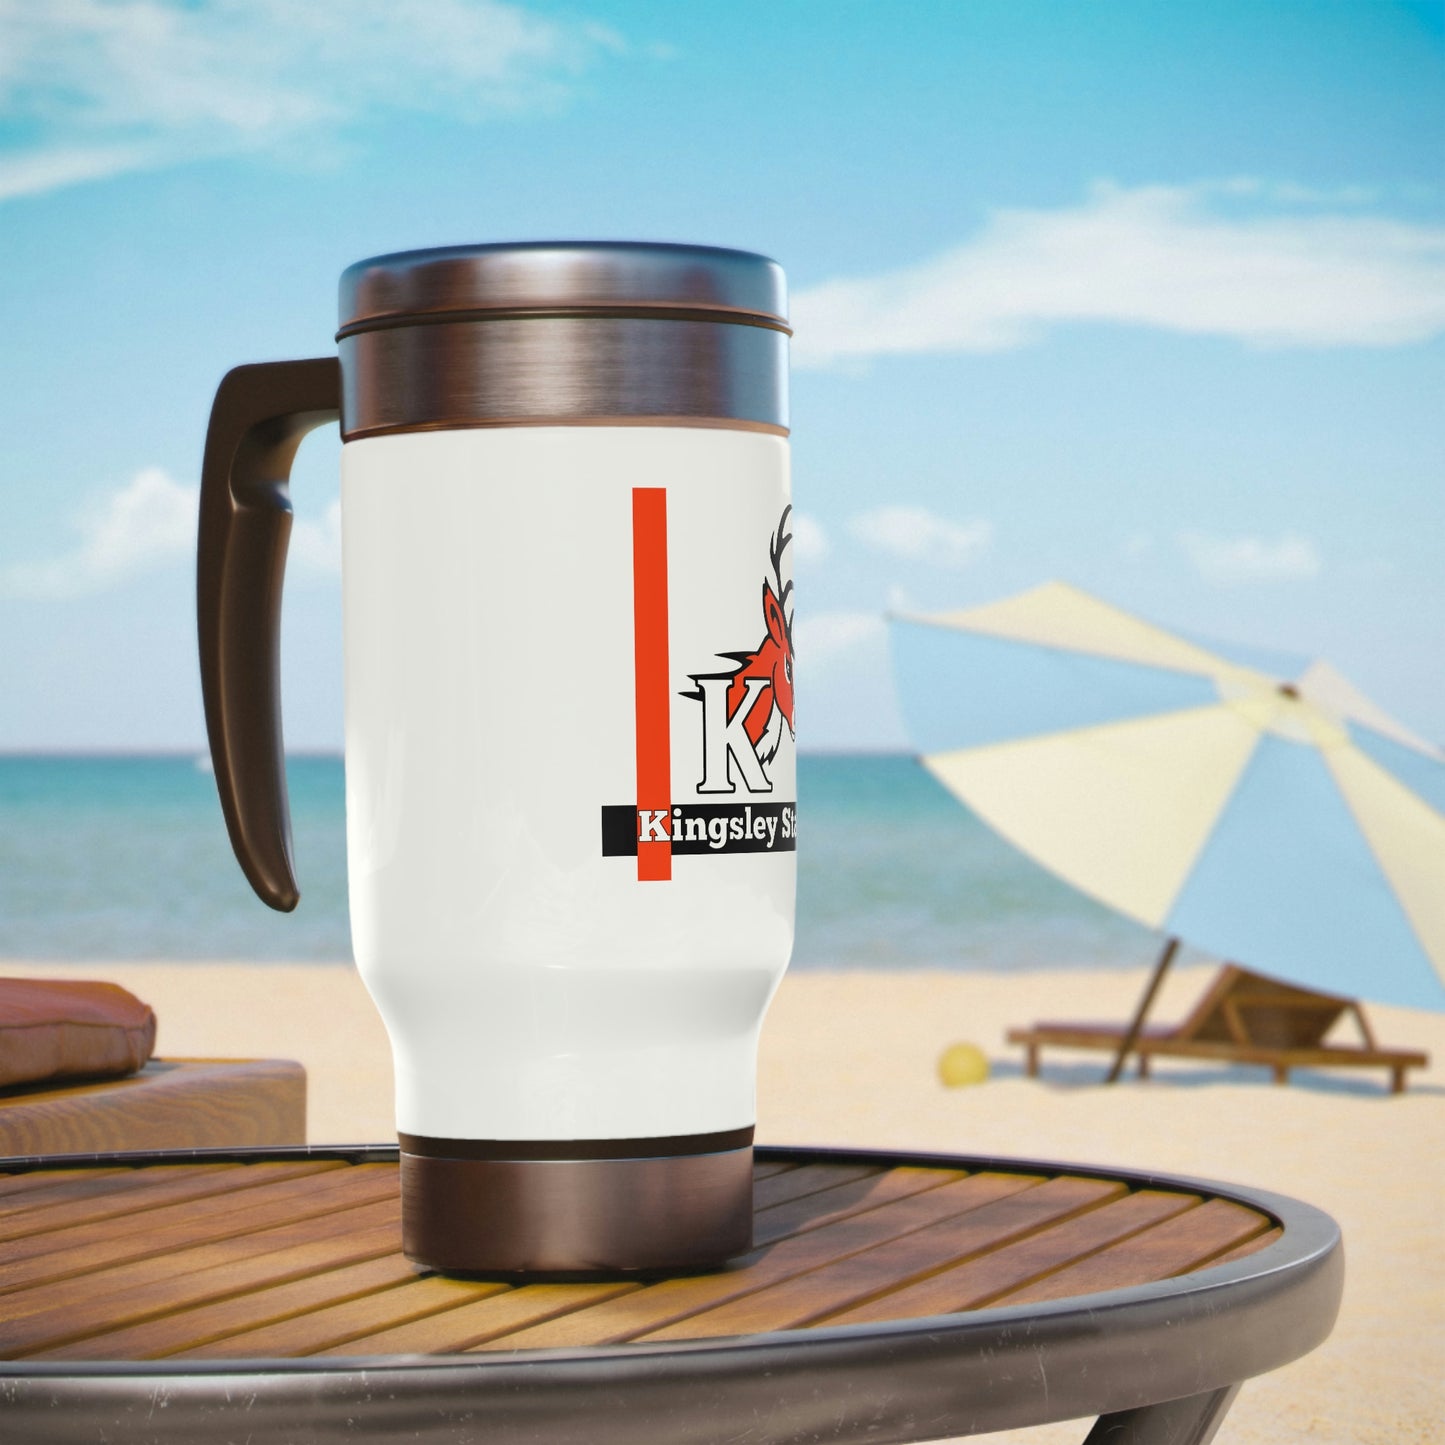 Stags Logo 4 Stainless Steel Travel Mug with Handle, 14oz  #H10-02C